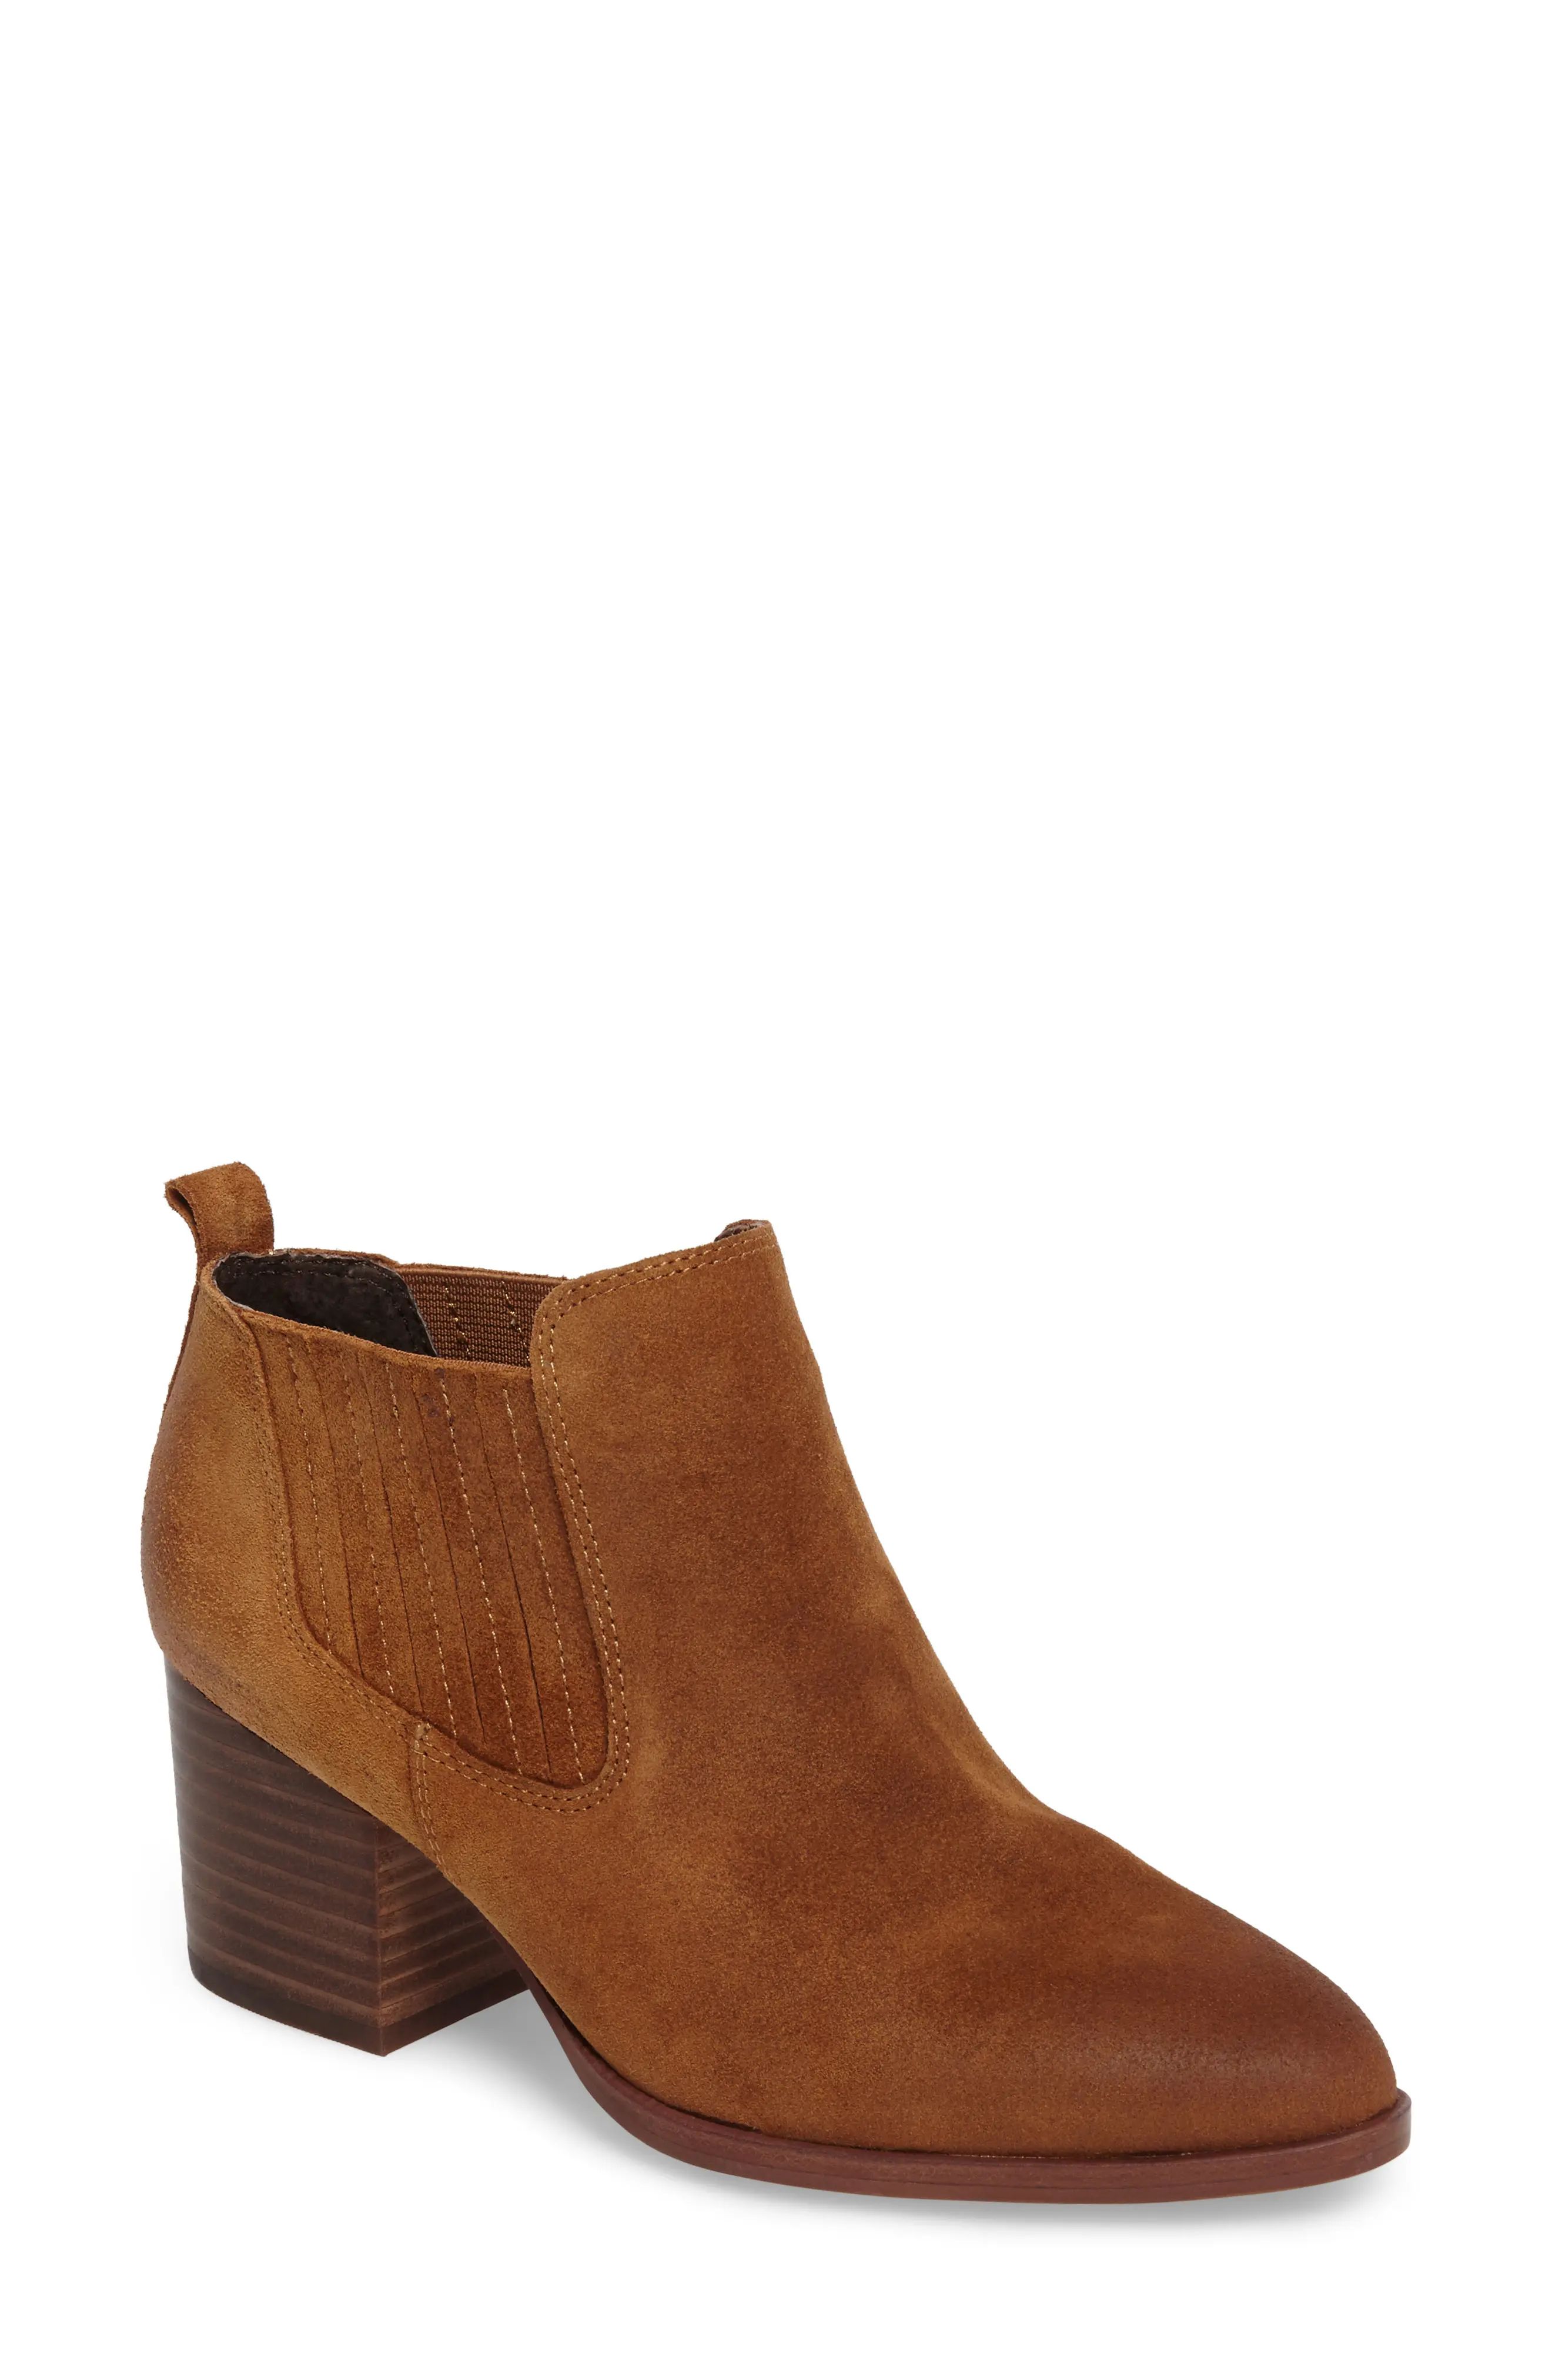 Olicia Gored Bootie | Nordstrom